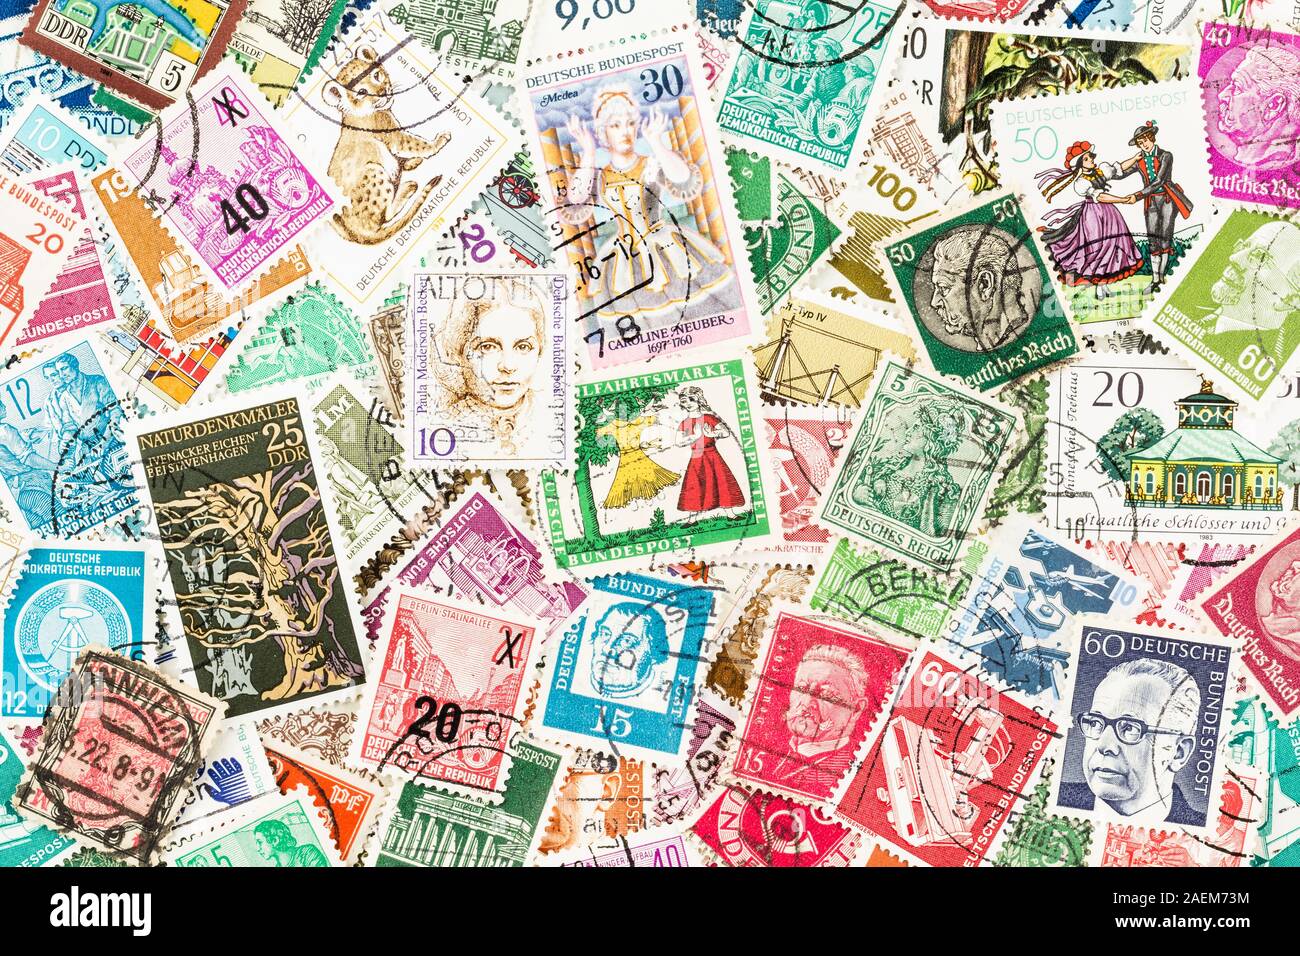 SEATTLE WASHINGTON - December 5, 2019:  Scattered used stamps of East and West Germany - Democratic and Federal Republics, Eastern and Western Bloc. Stock Photo